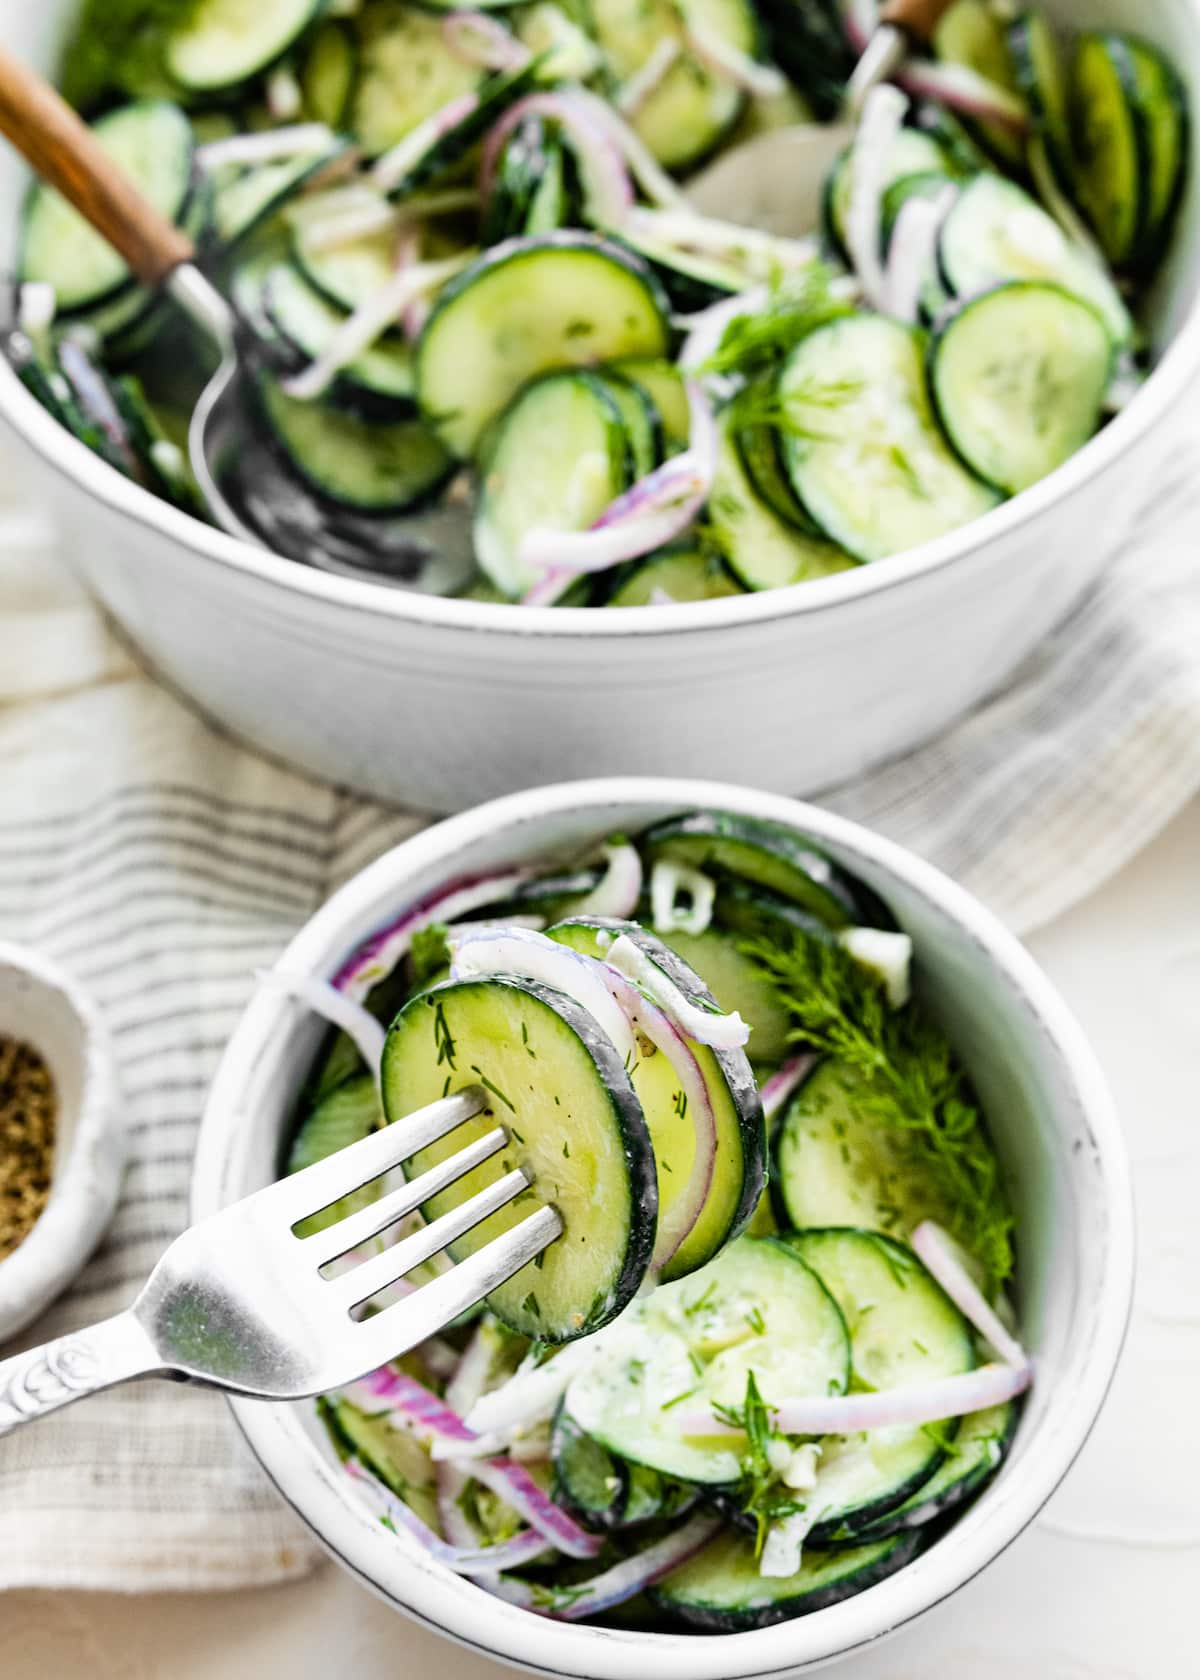 A fork taking a bite-sized portion of cucumber salad from a bowl.